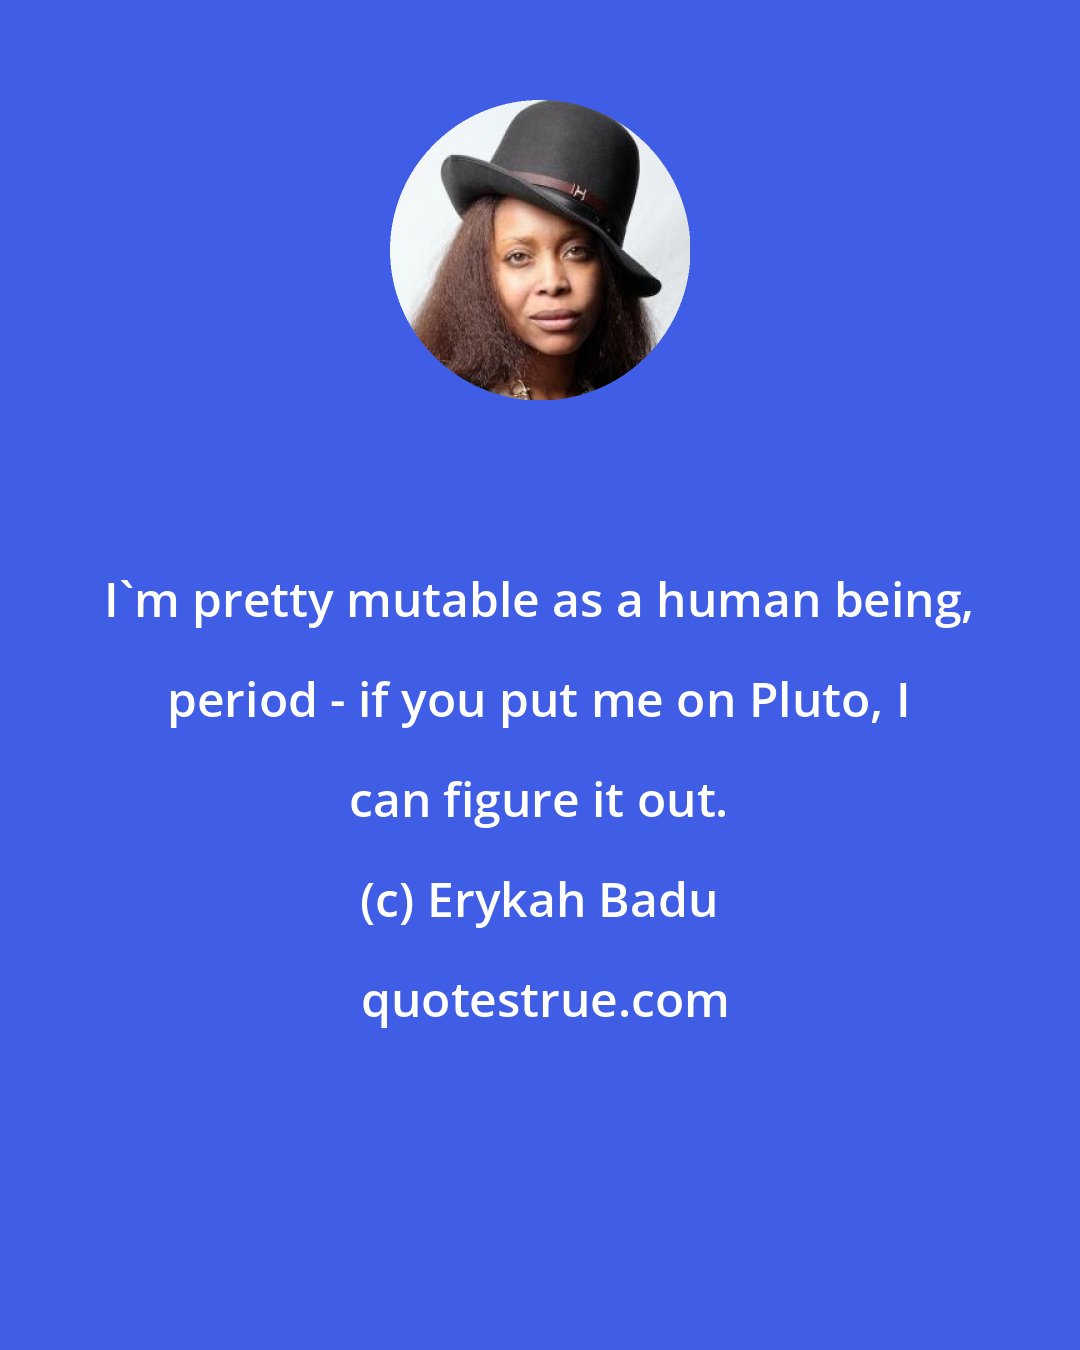 Erykah Badu: I'm pretty mutable as a human being, period - if you put me on Pluto, I can figure it out.